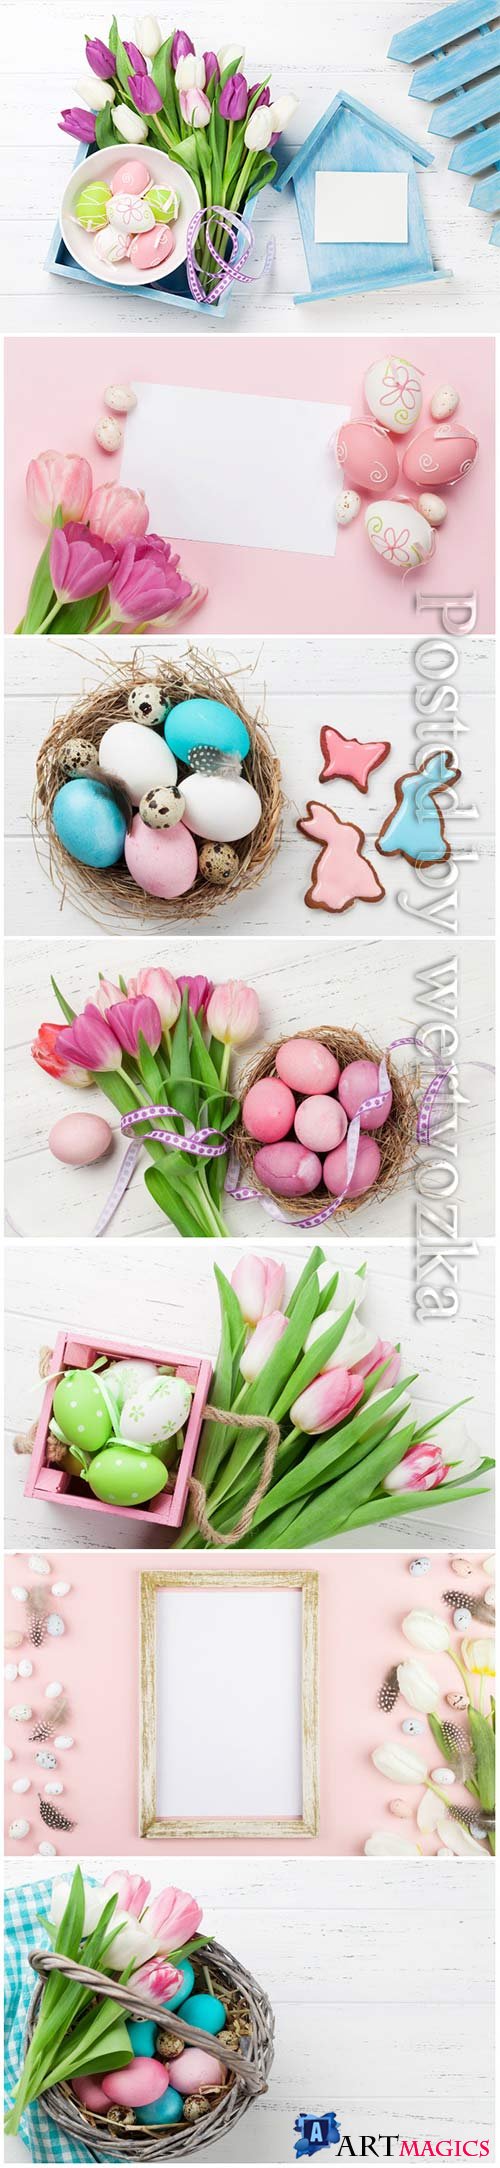 Happy Easter stock photo, Easter eggs, spring flowers # 7